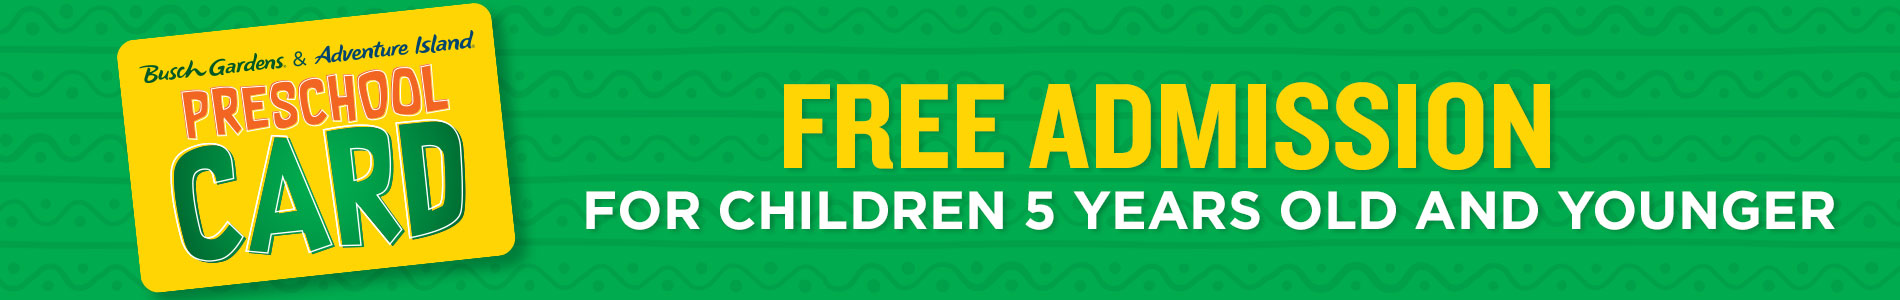 Free Admission for children 5 years and younger with a preschool card